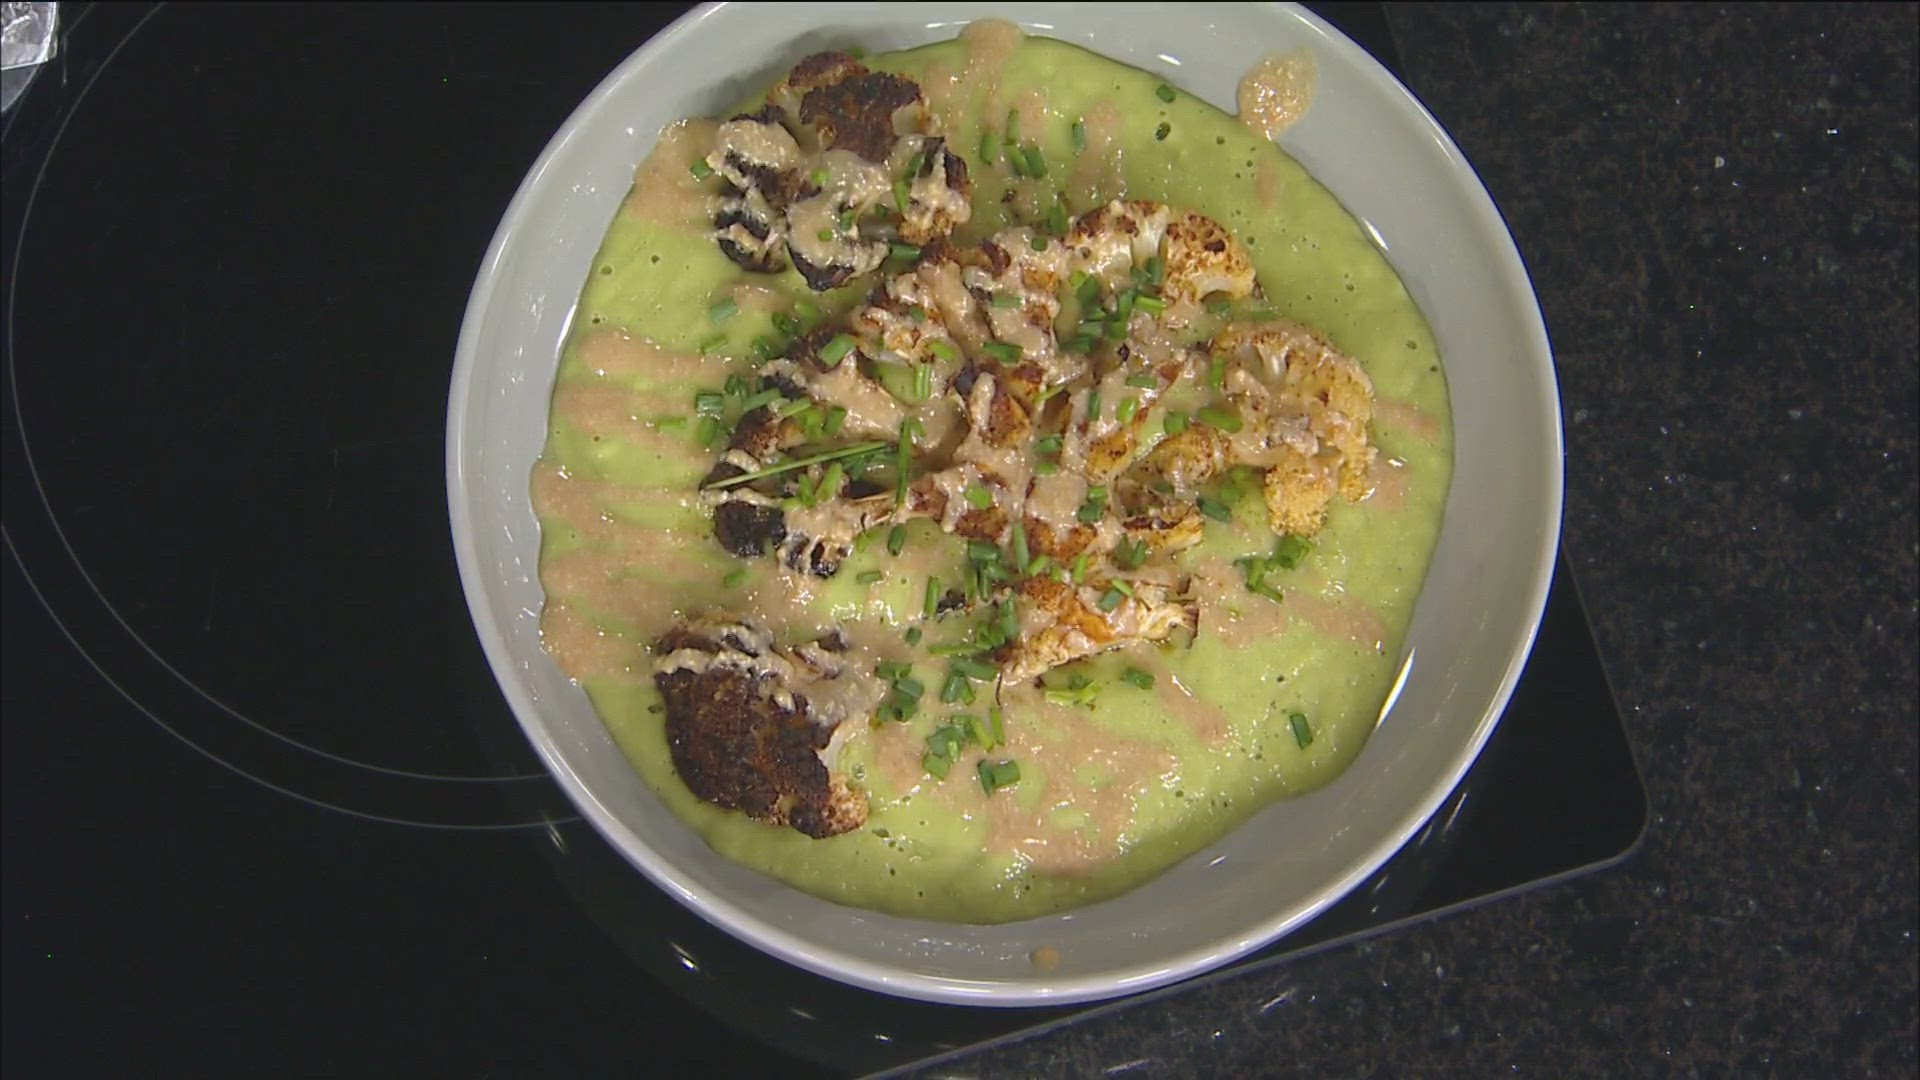 Chef Daniel Green joins KARE 11 Saturday to share his recipe for a plant-based meal that's anything but boring.